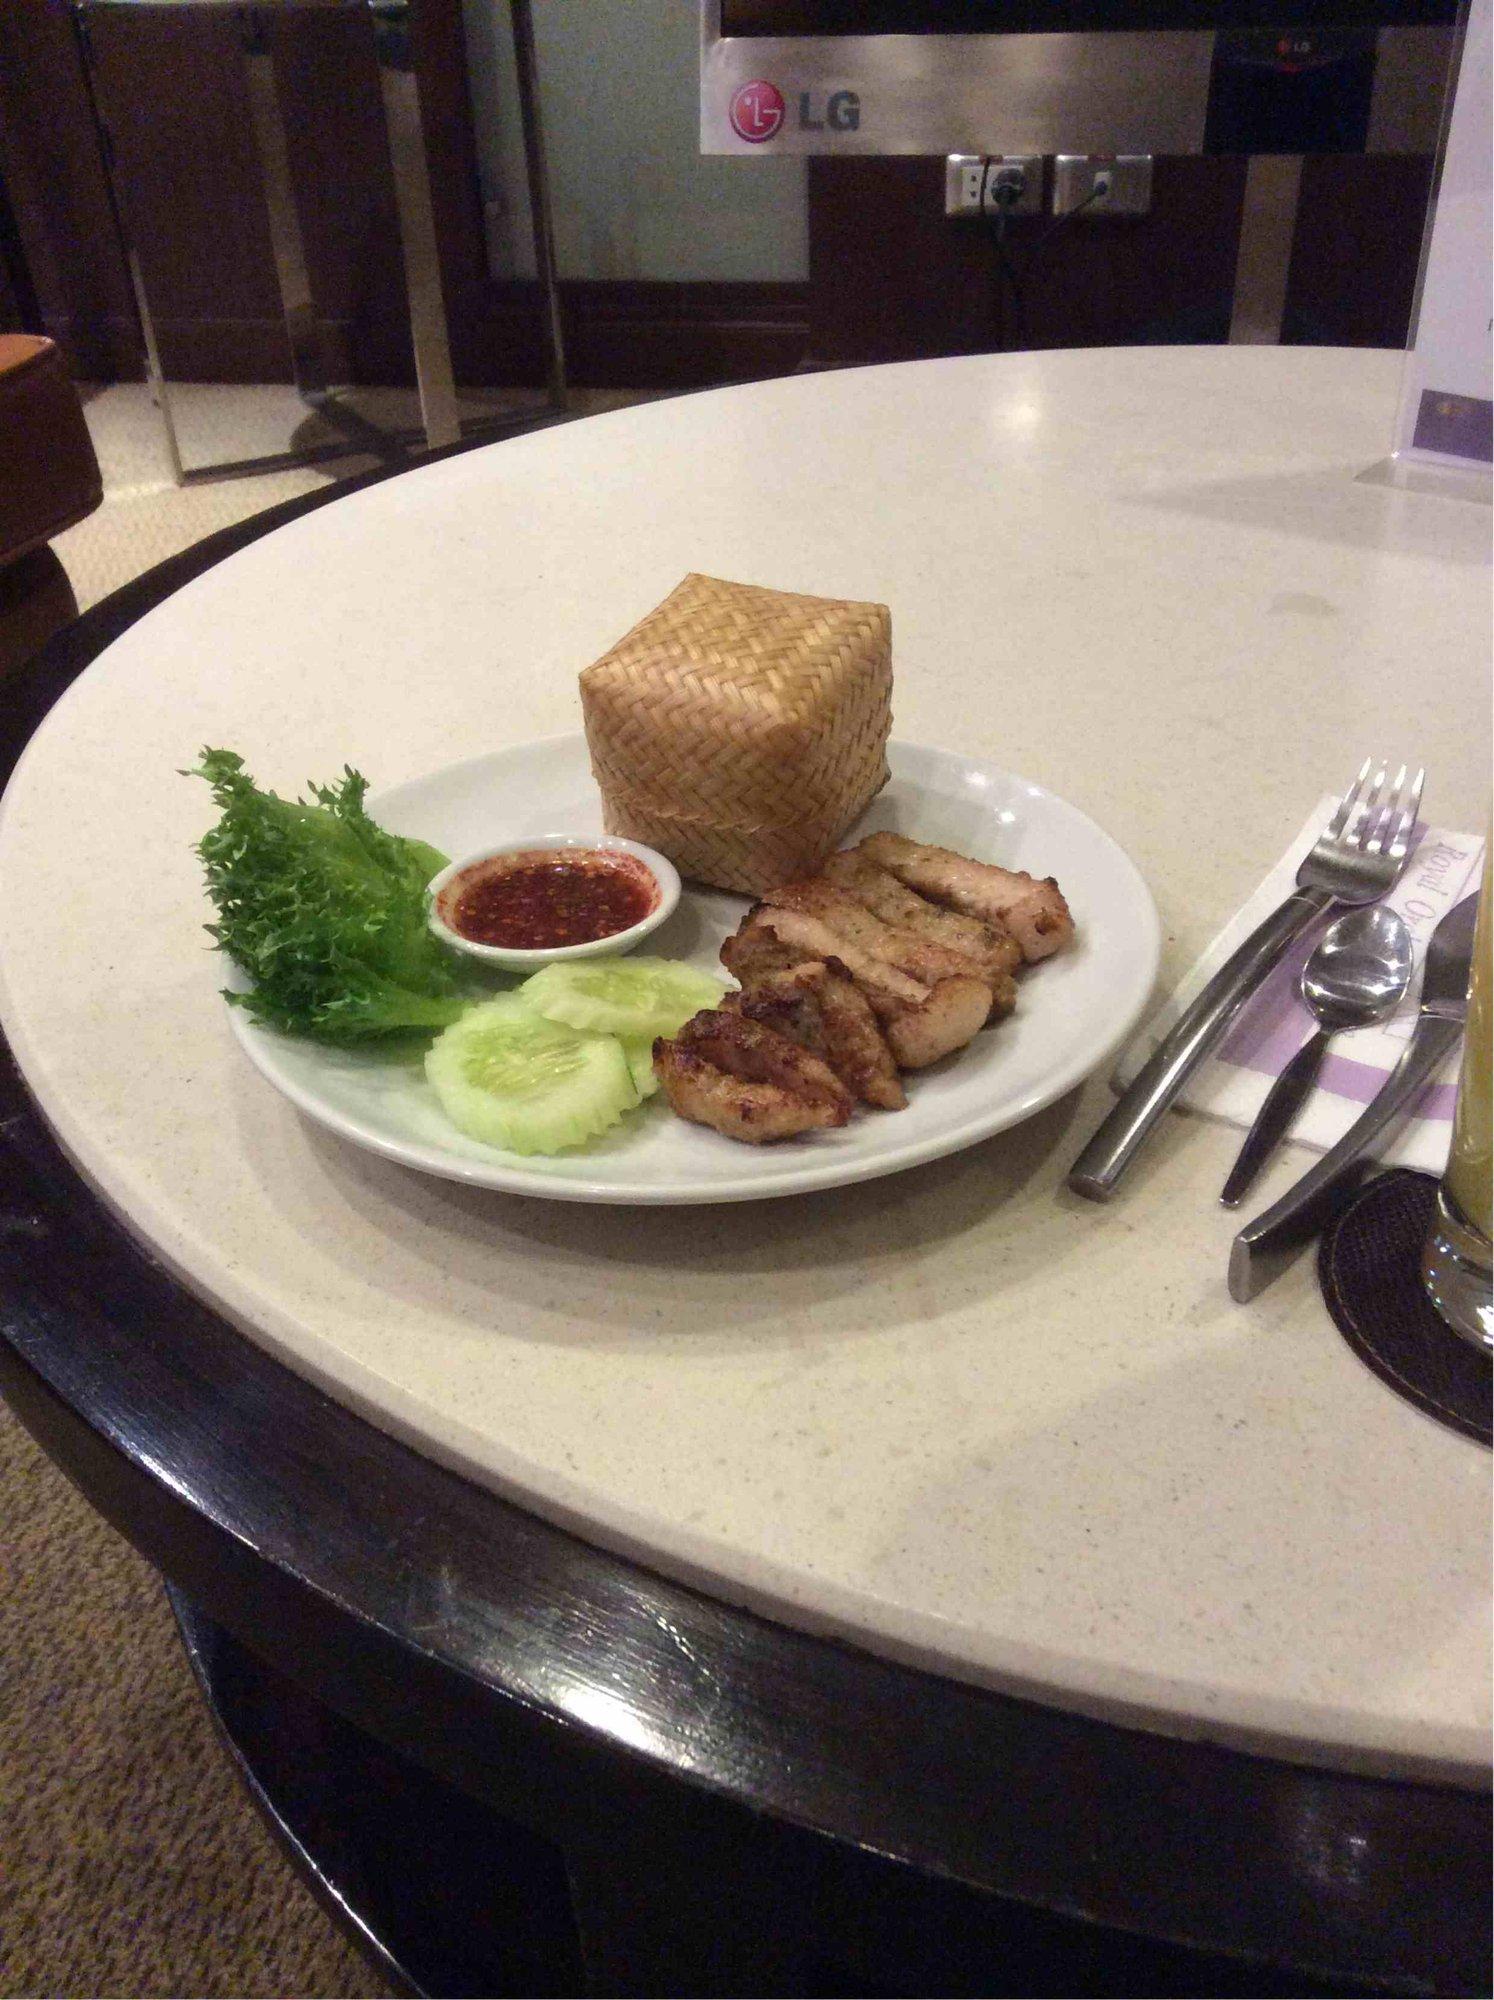 Thai Airways Royal First Class Lounge image 4 of 44